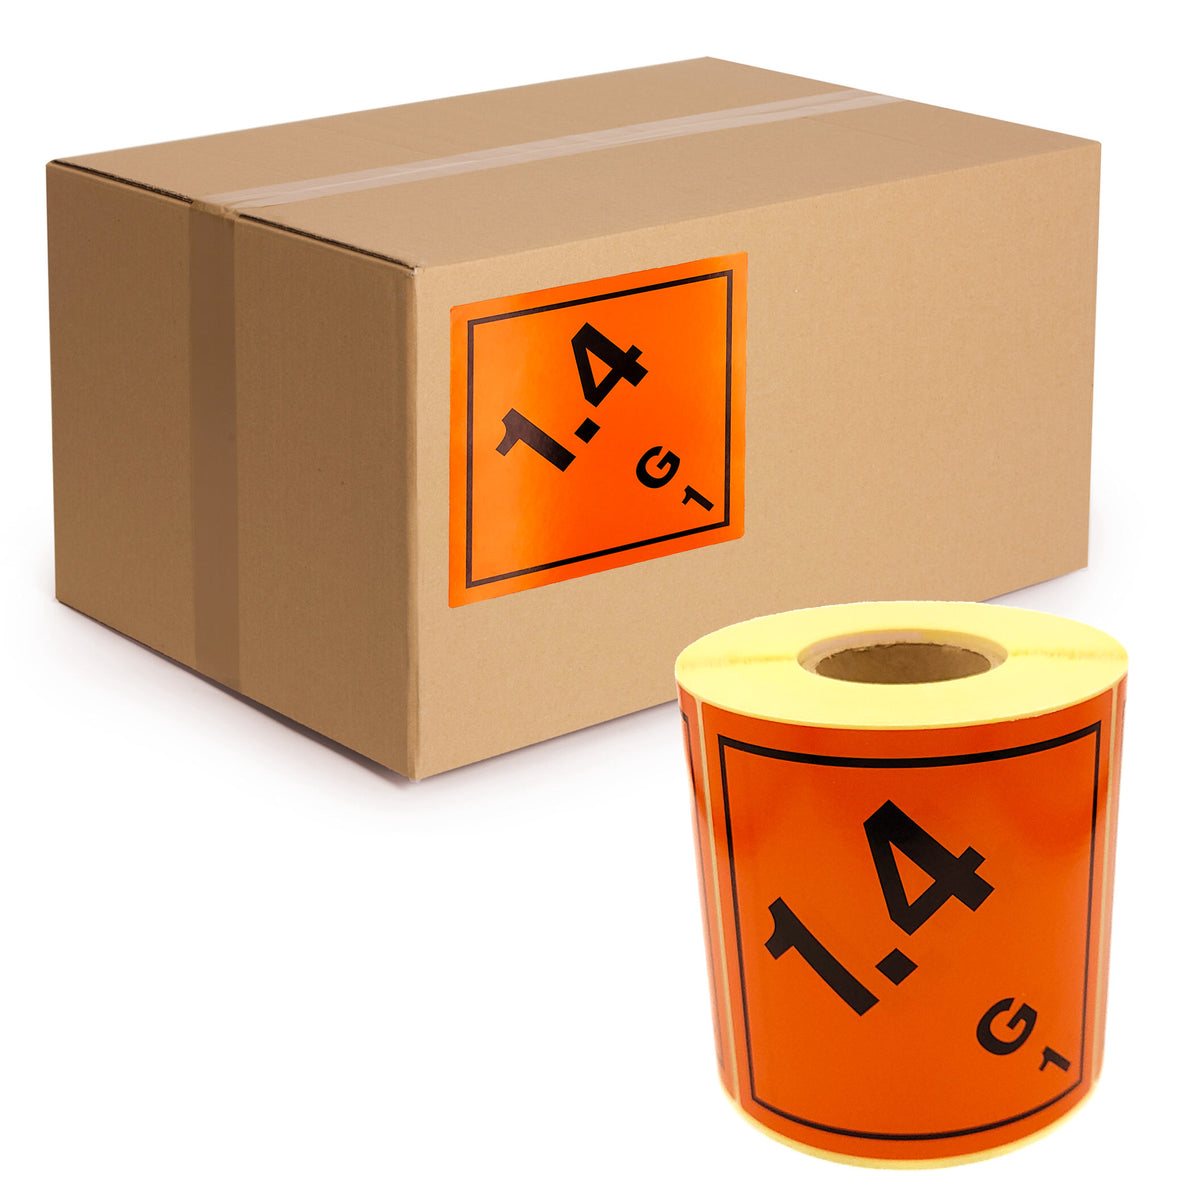 Warning Labels Class 1.4 G Materials and Objects that pose only a low risk of explosion Transport Stickers 100x100 500 per roll